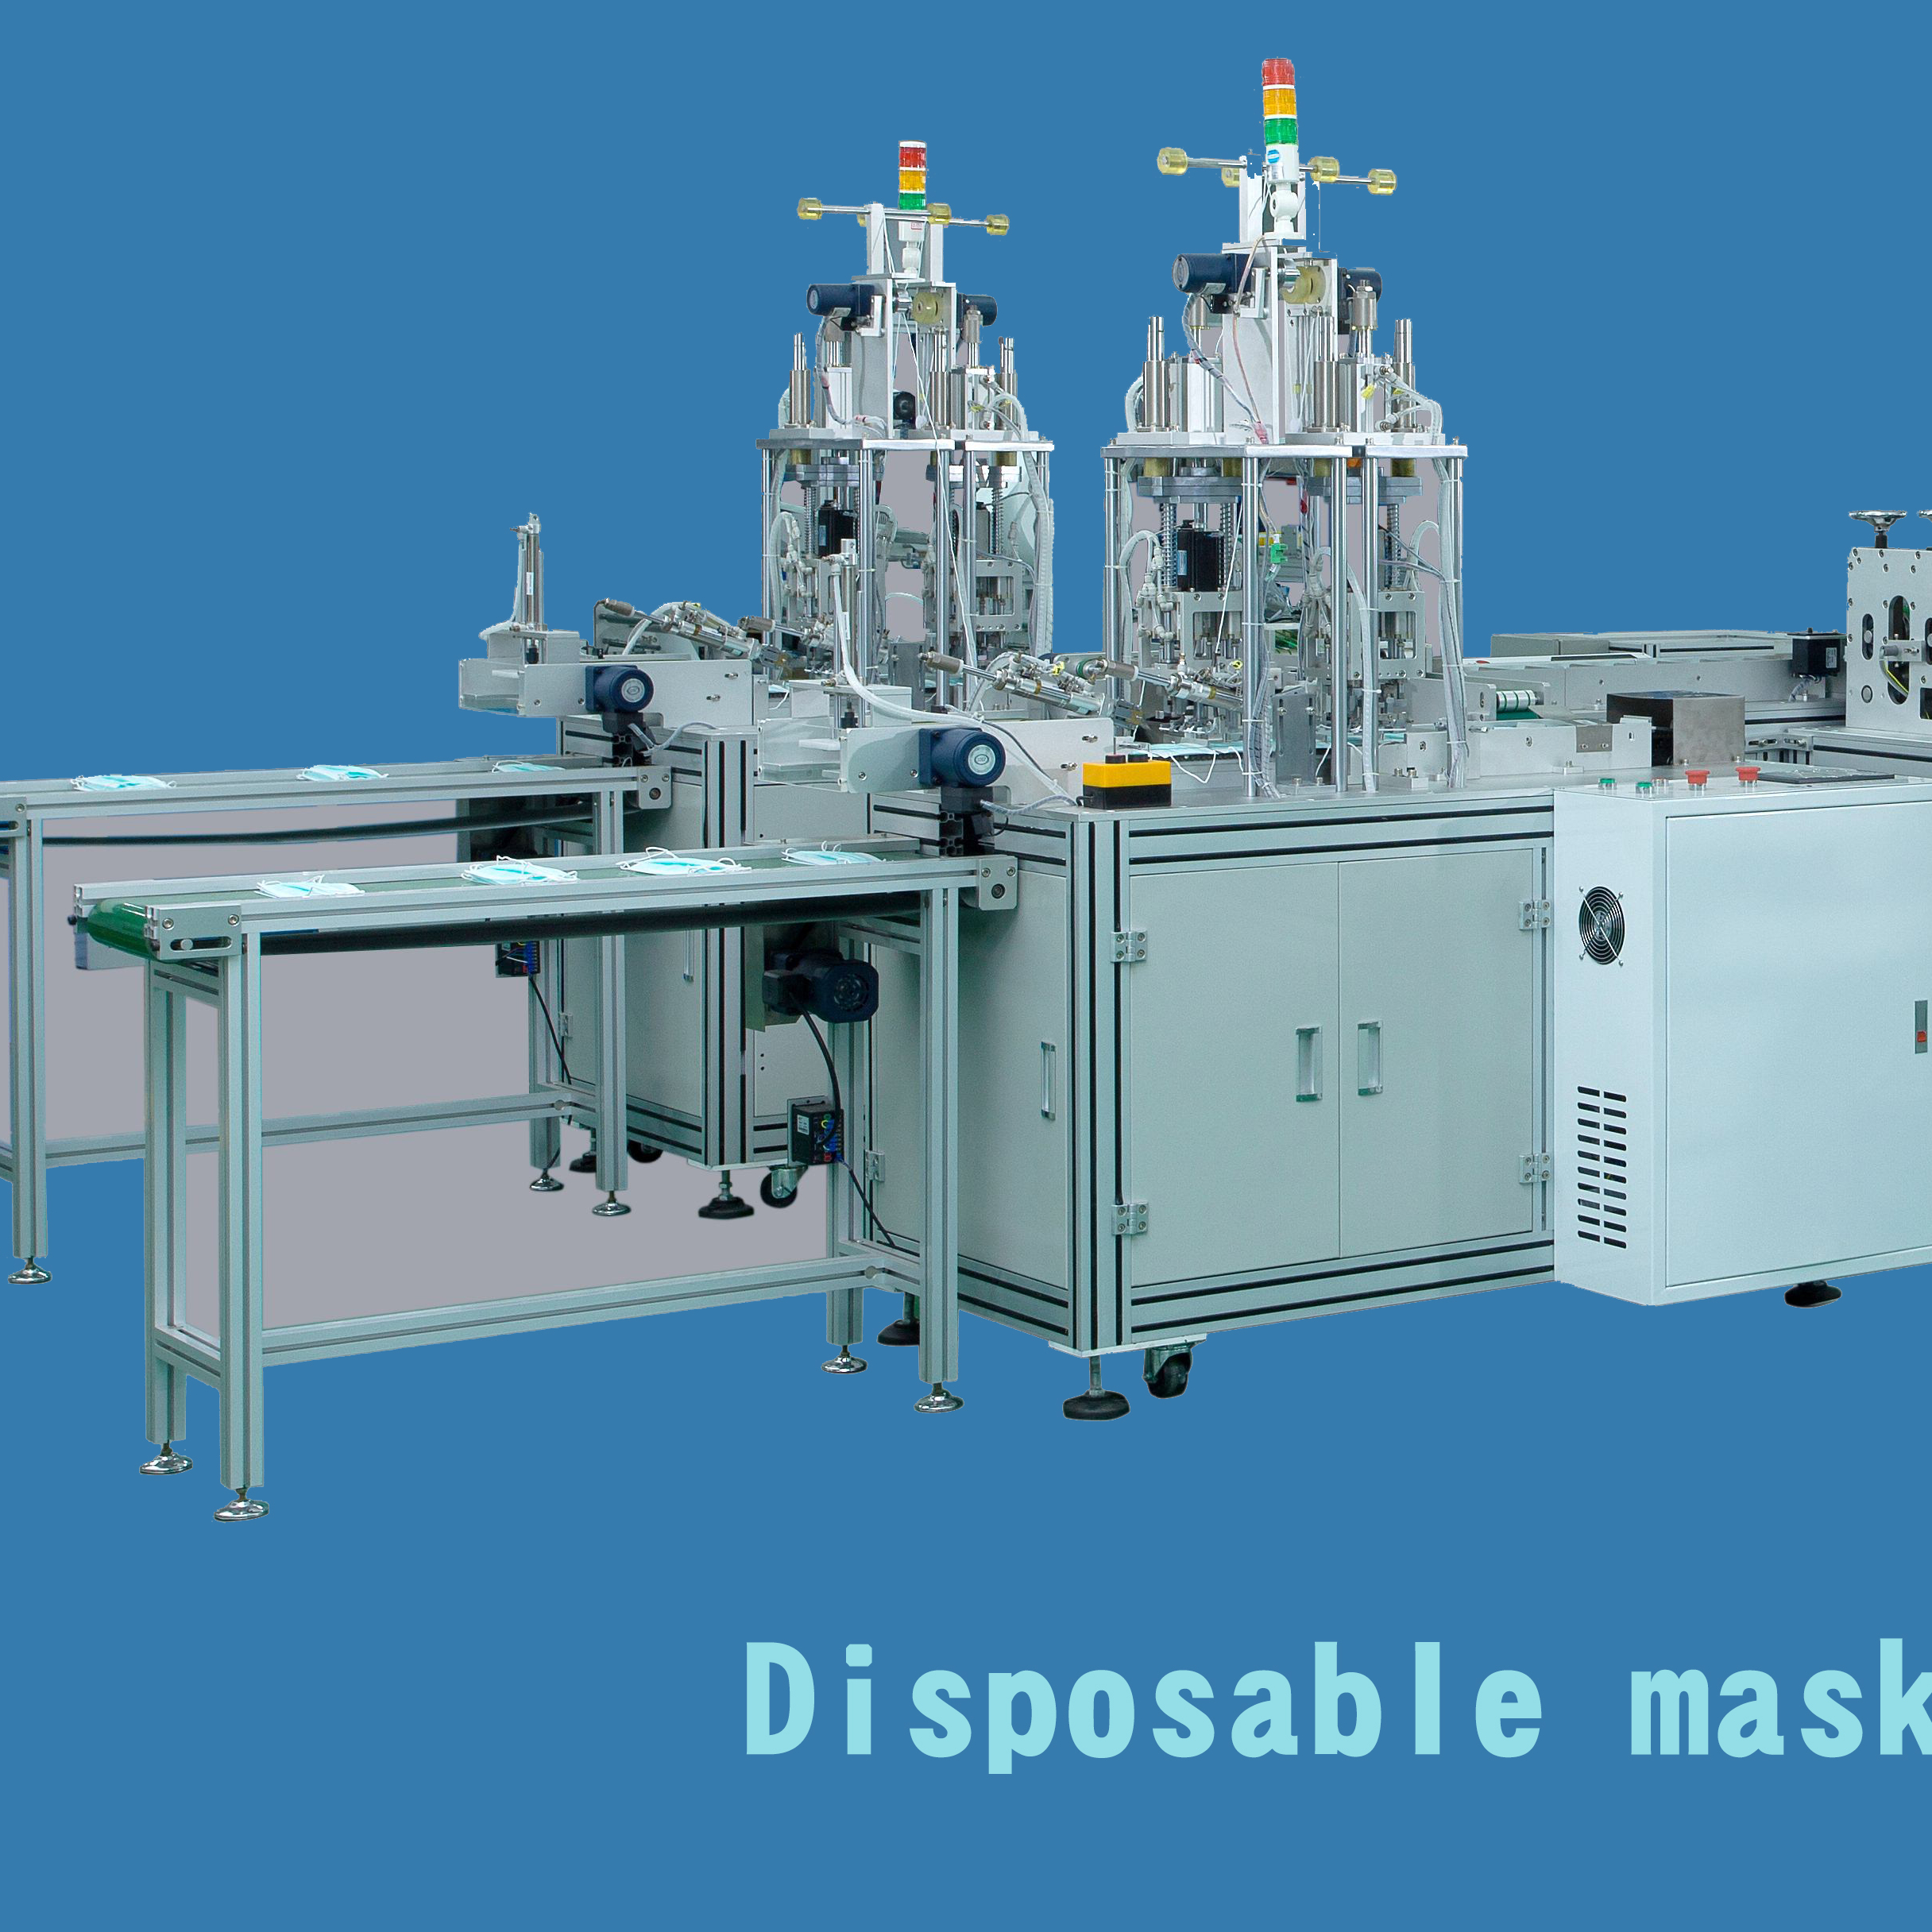 Ebiltech-Two Disposable Medical Surgical Face Mask Machine